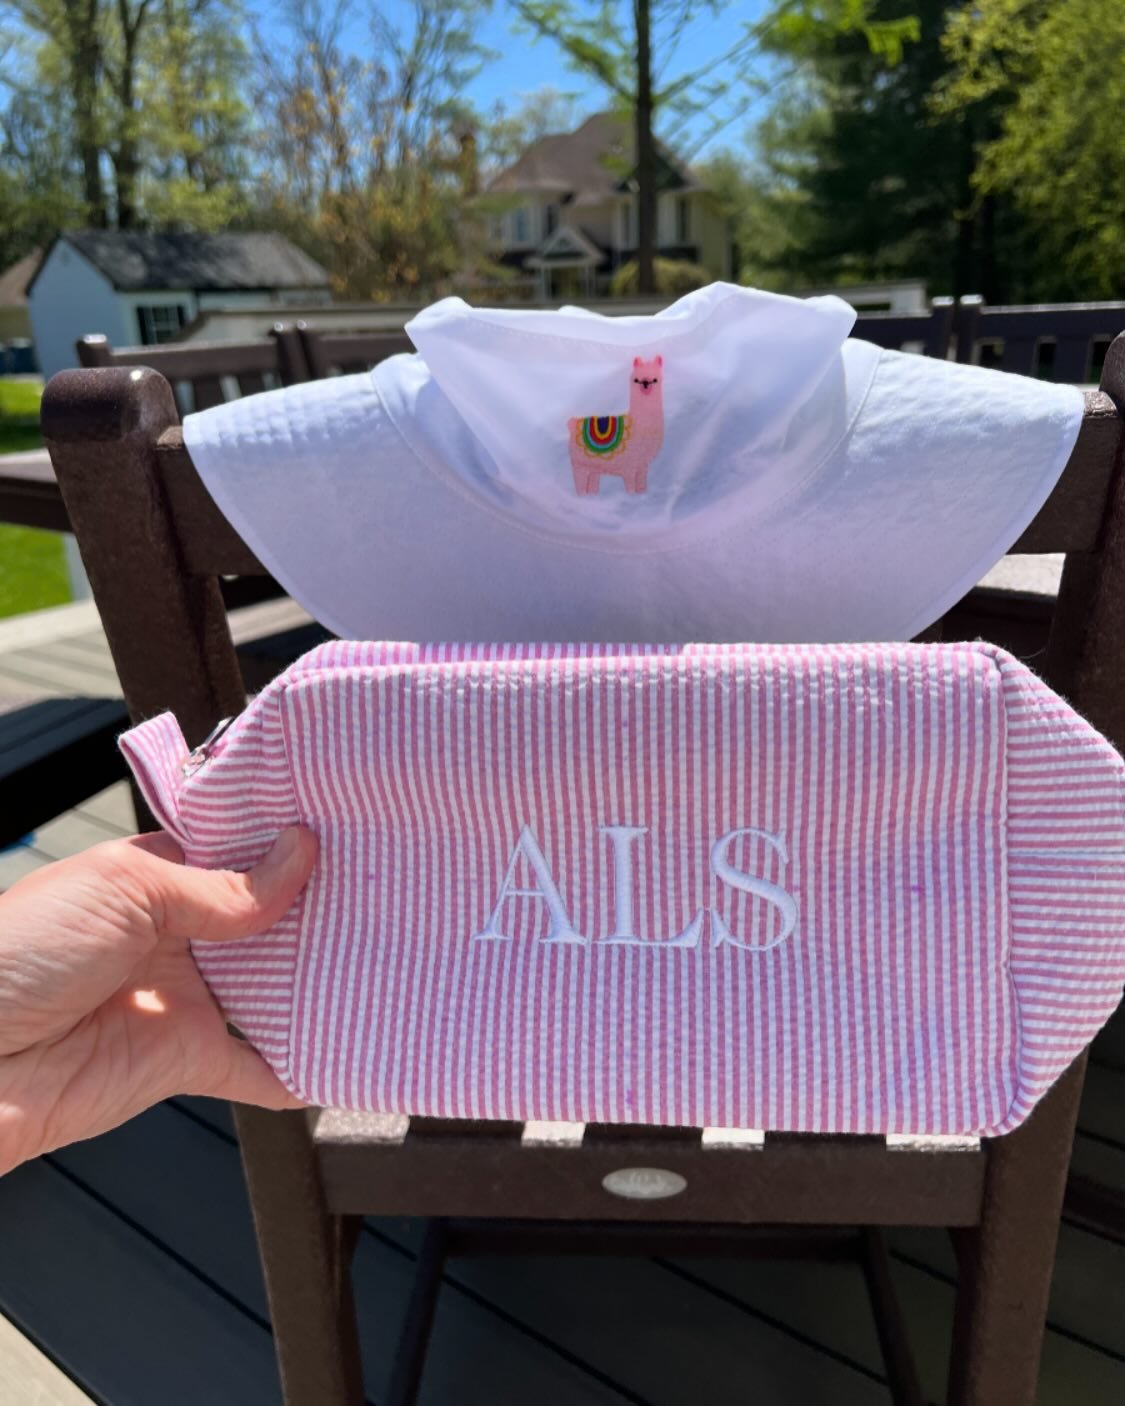 Monogrammed Dopp/toiletry bag, seersucker material and children&rsquo;s bucket style sun hat with a llama embroidered! 🦙❤️